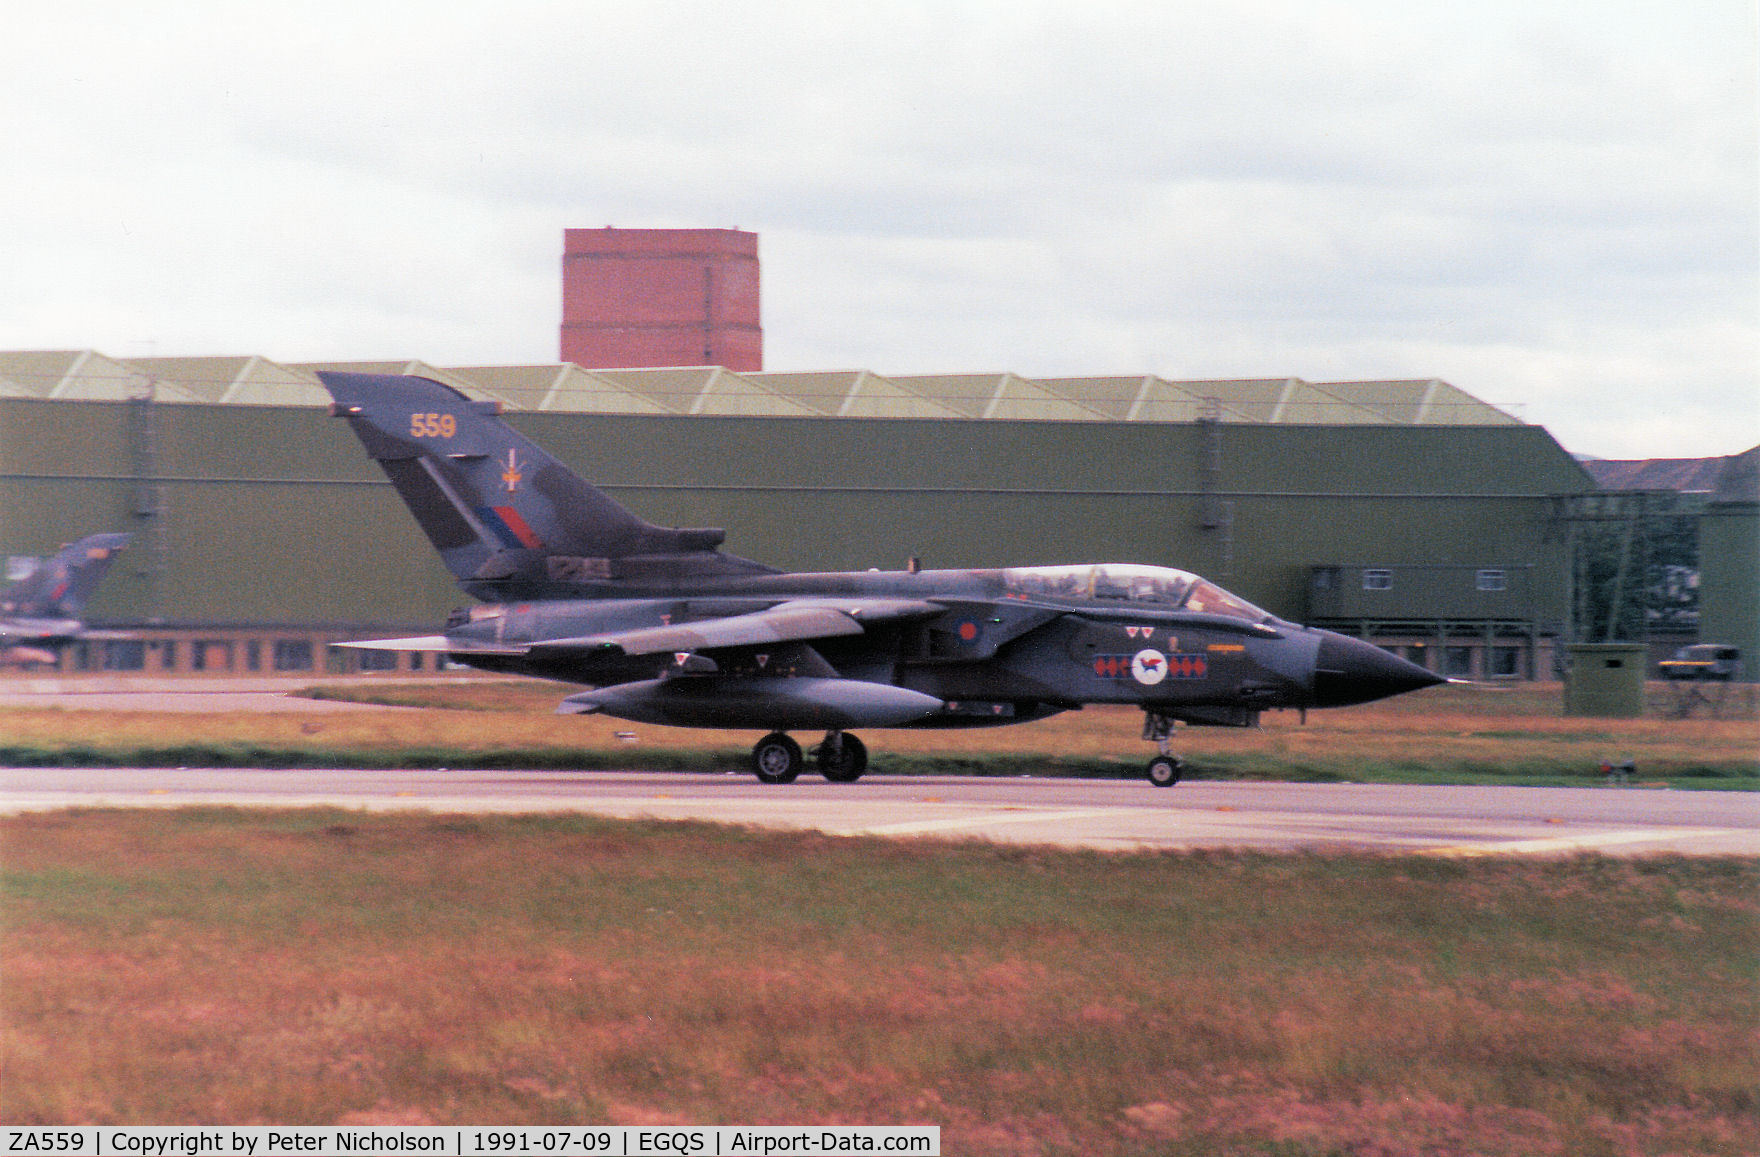 ZA559, 1981 Panavia 081/BS023/3043 C/N 081/BS023/3043, Tornado GR.1, callsign Magnum 2, of the Tactical Weapons Conversion Unit at RAF Honington taxying to the active runway at RAF Lossiemouth in the Summer of 1991.